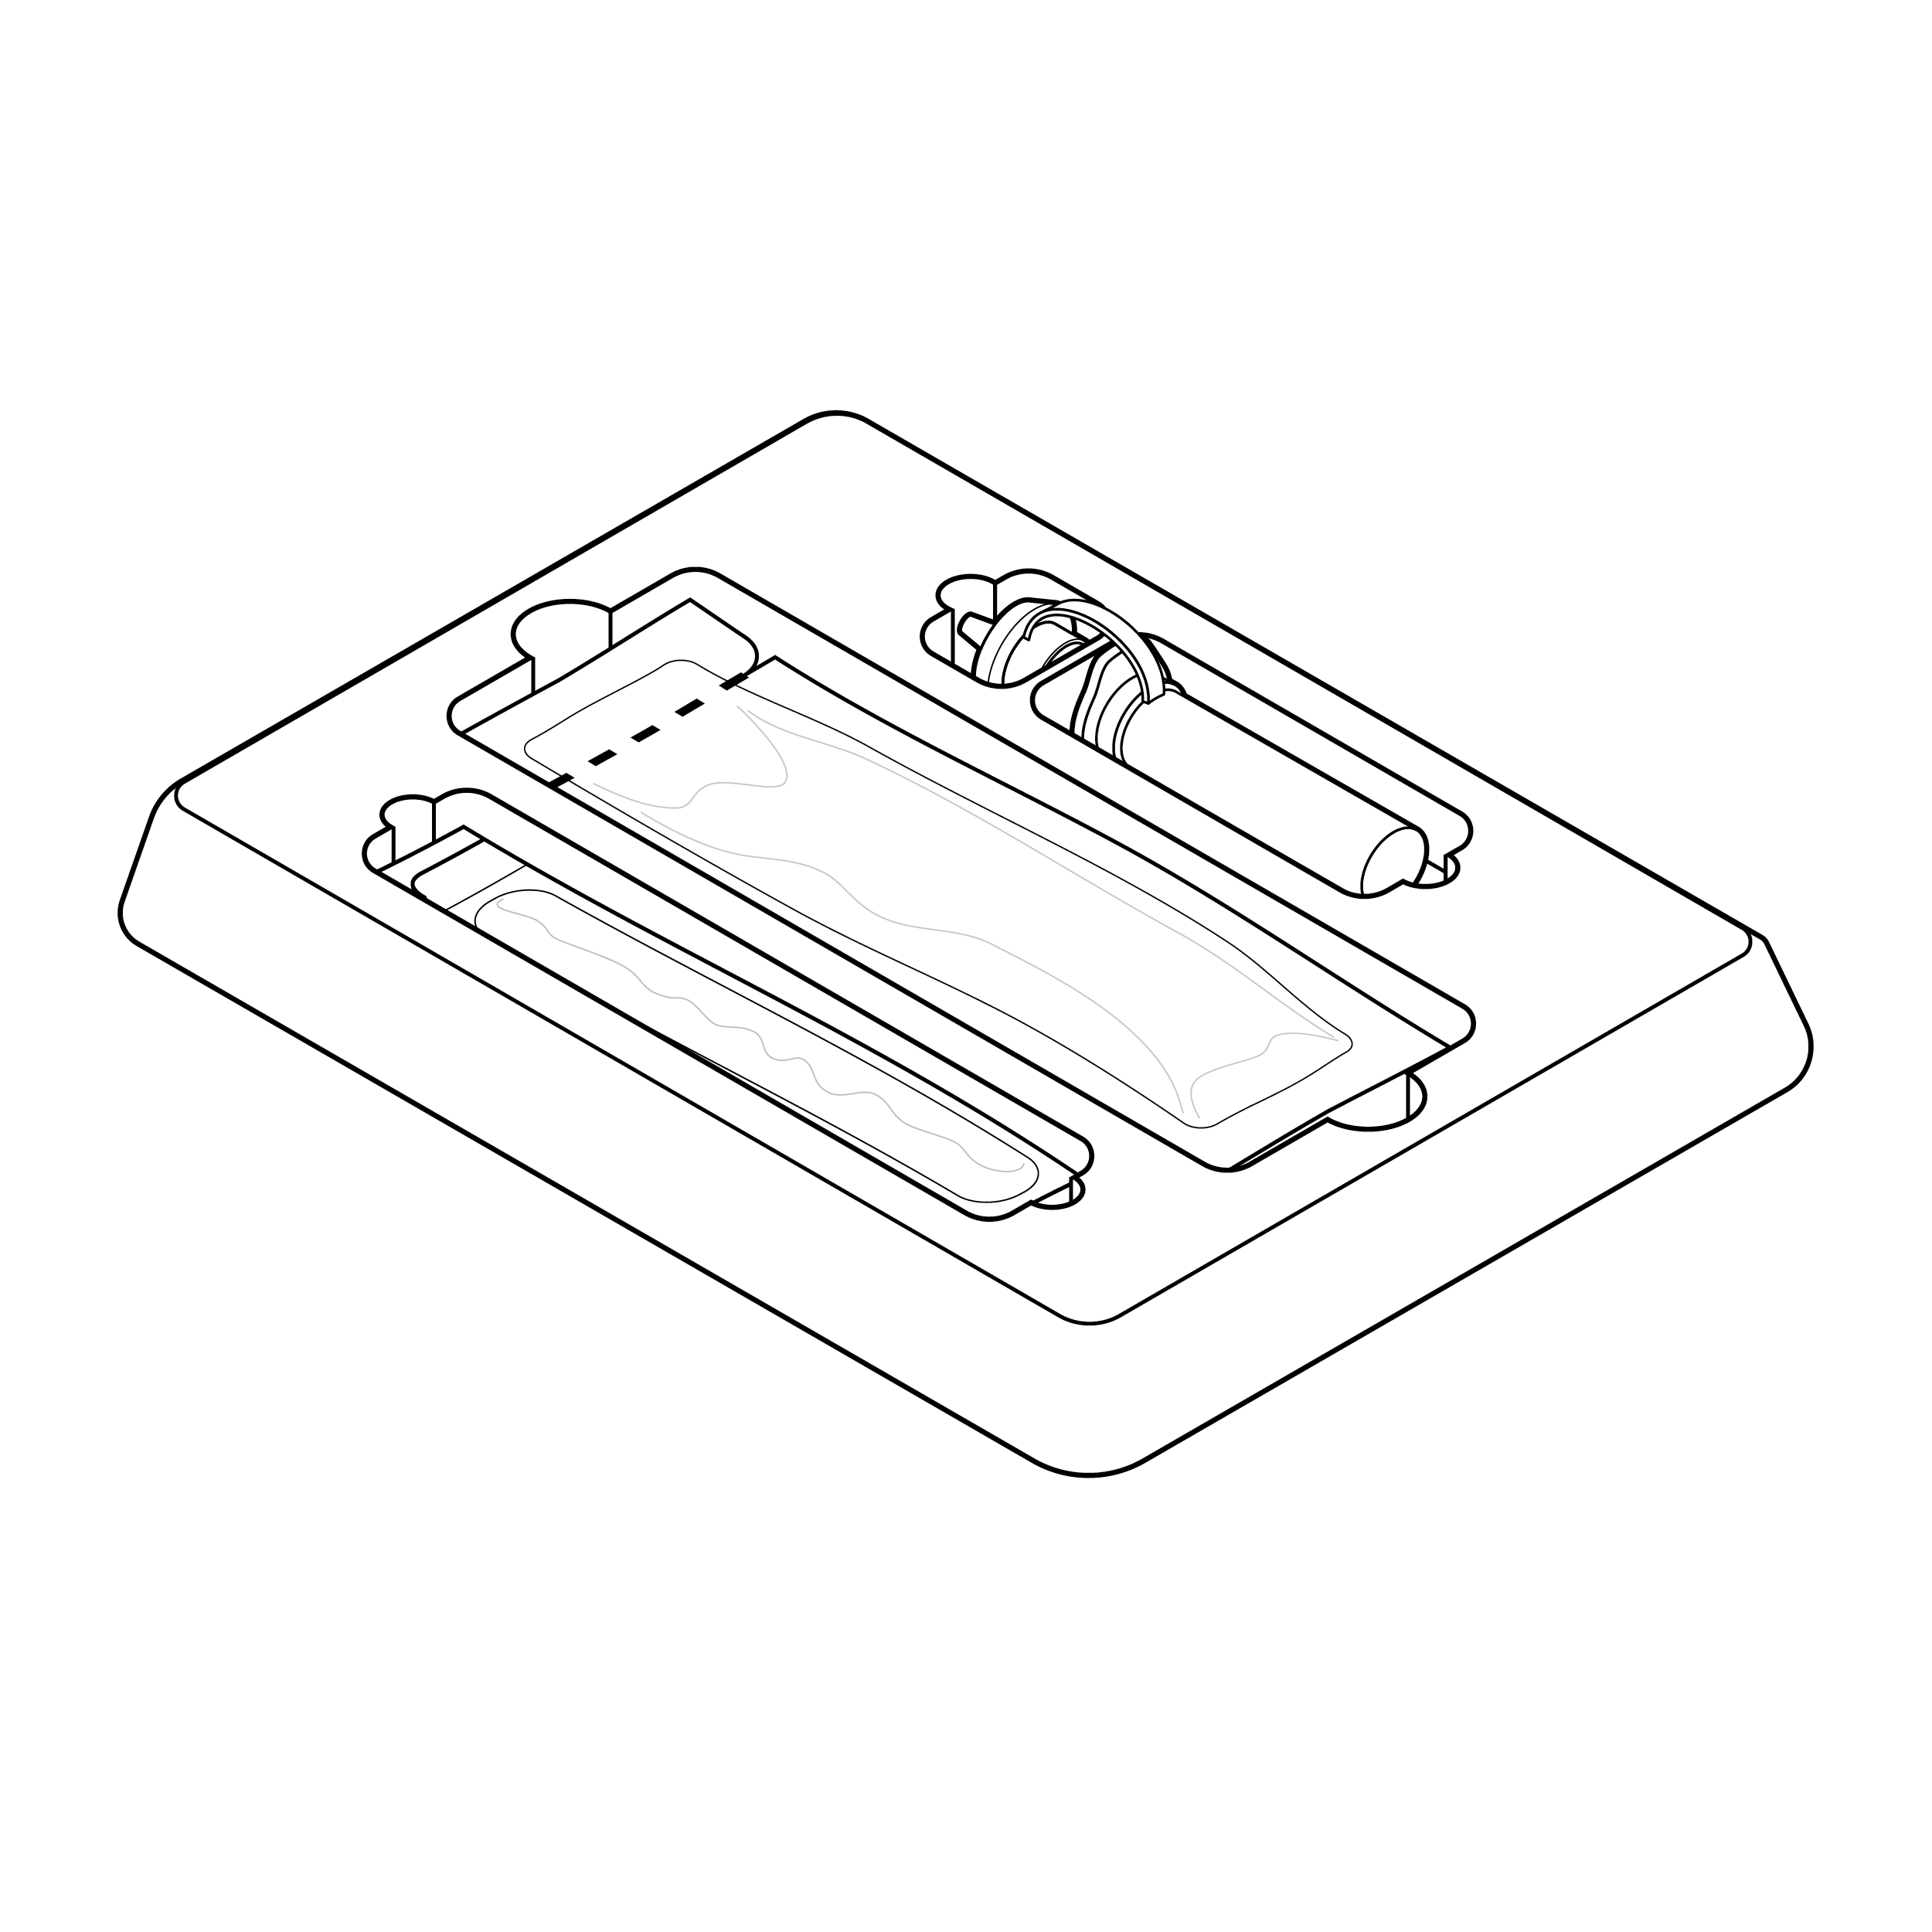 An internal tray with pockets for two pouched items and a dropper vial. There is no labeling on the tray or items.